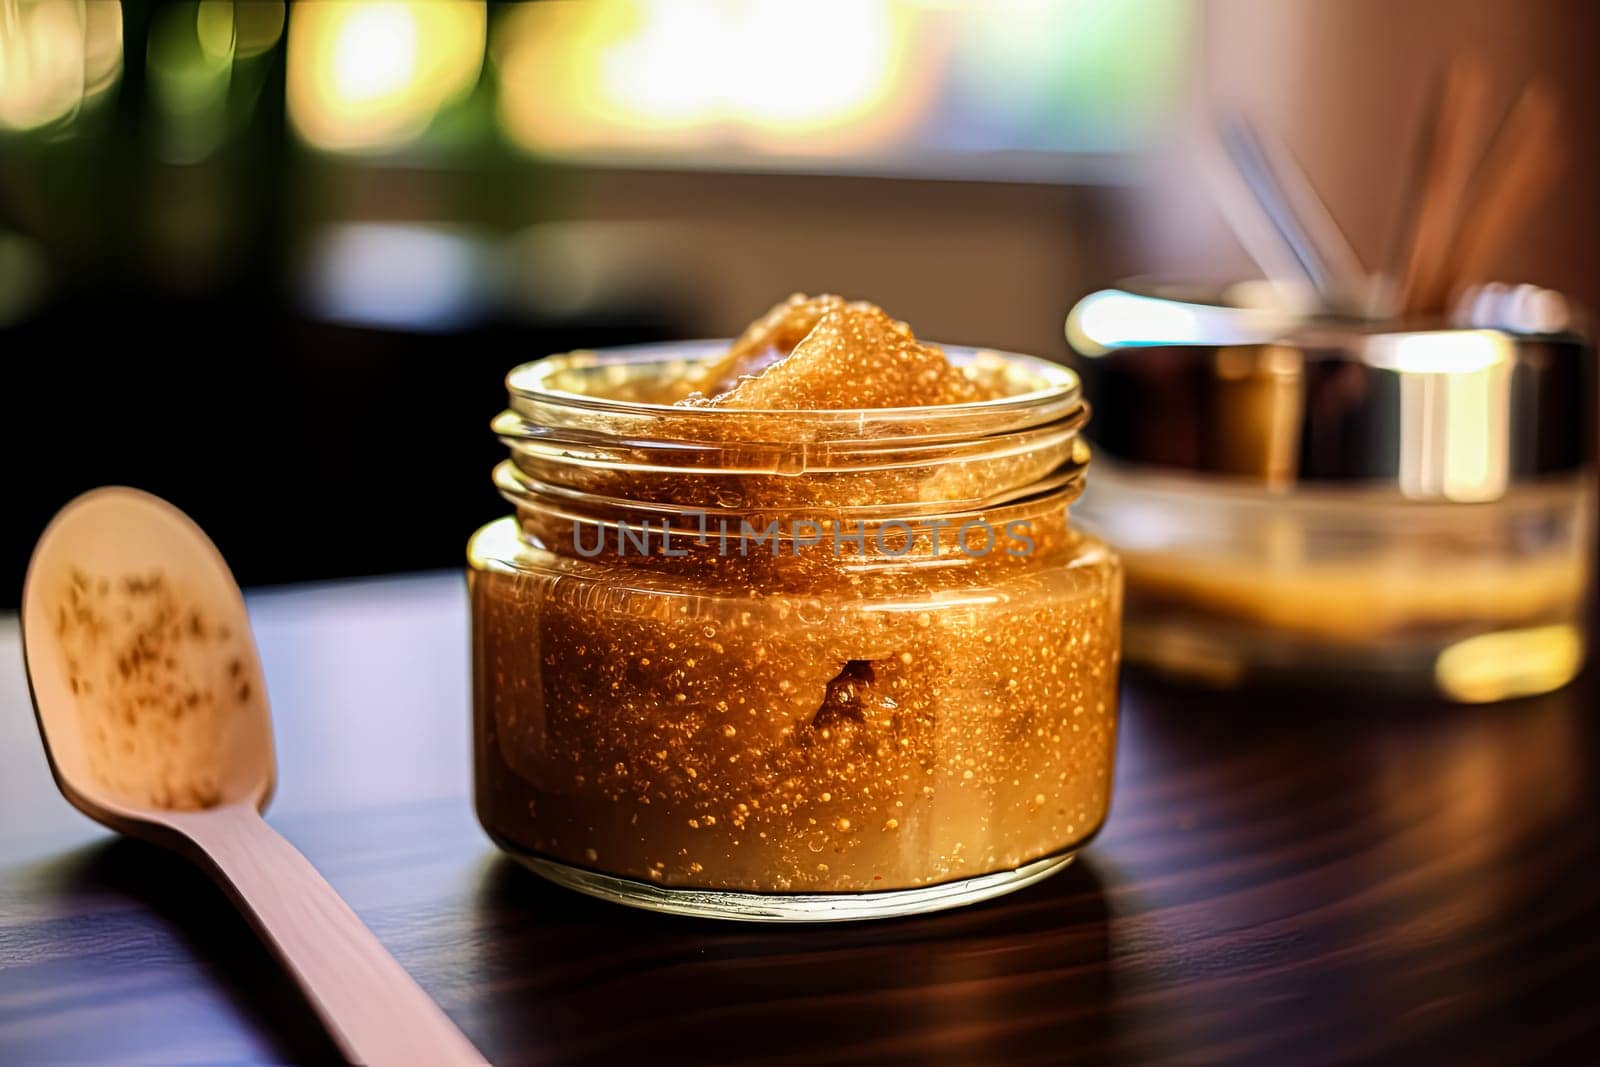 Treat your skin to our coffee-infused sugar cellulite scrub in a sleek glass jar. Perfect for exfoliating and rejuvenating your body's natural glow.